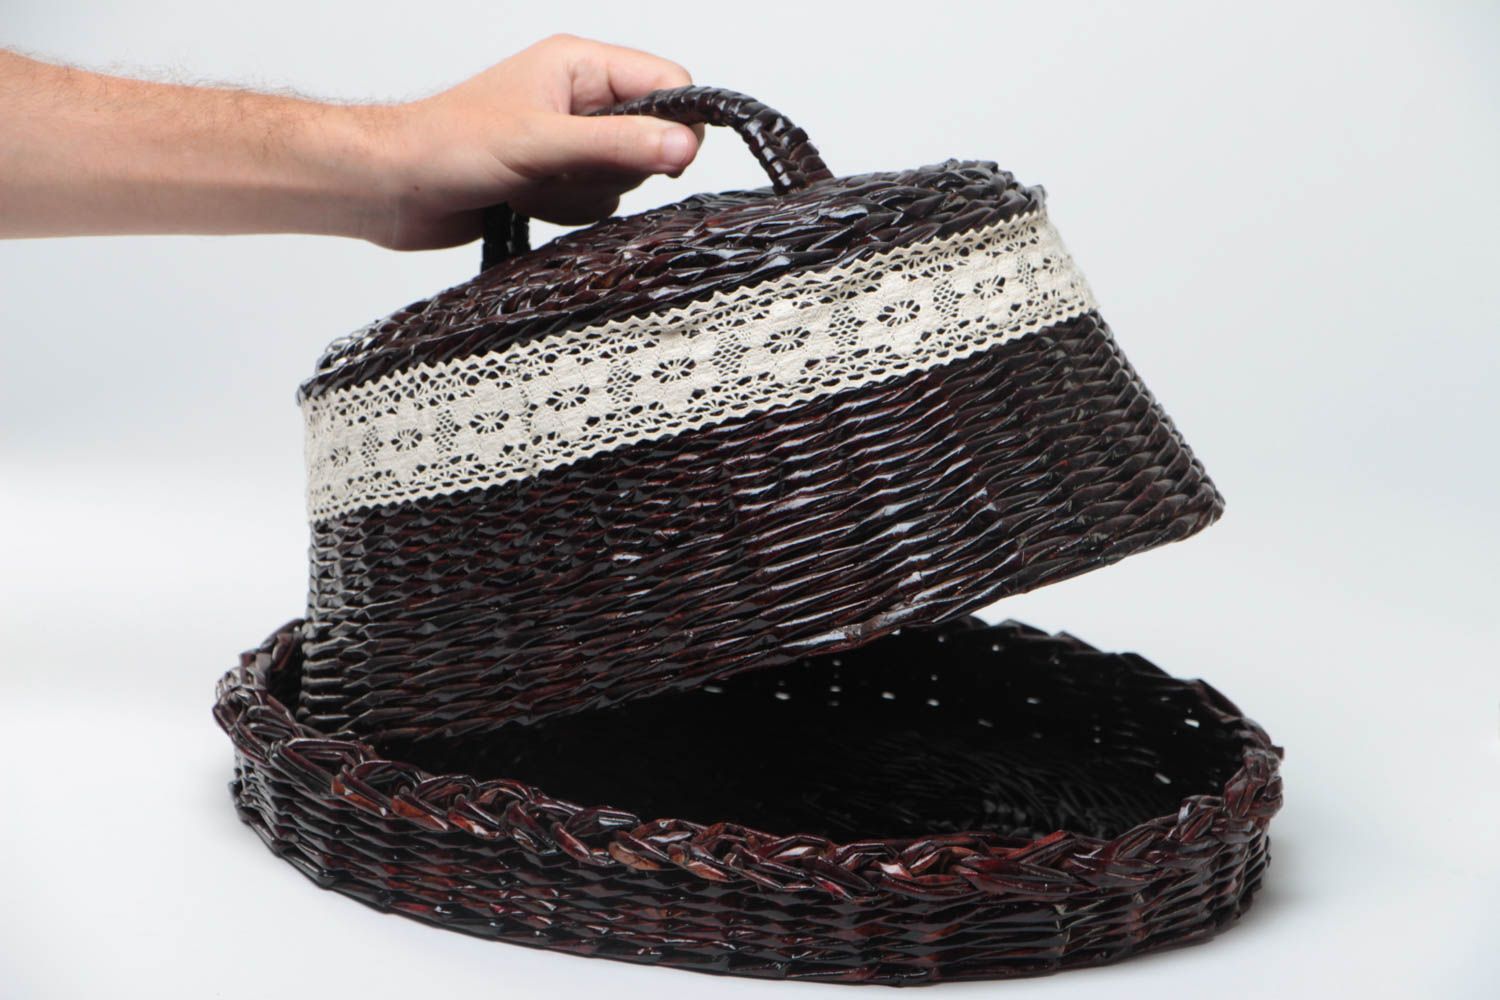 Handmade decorative black bread basket woven of paper tubes trimmed with lace photo 5